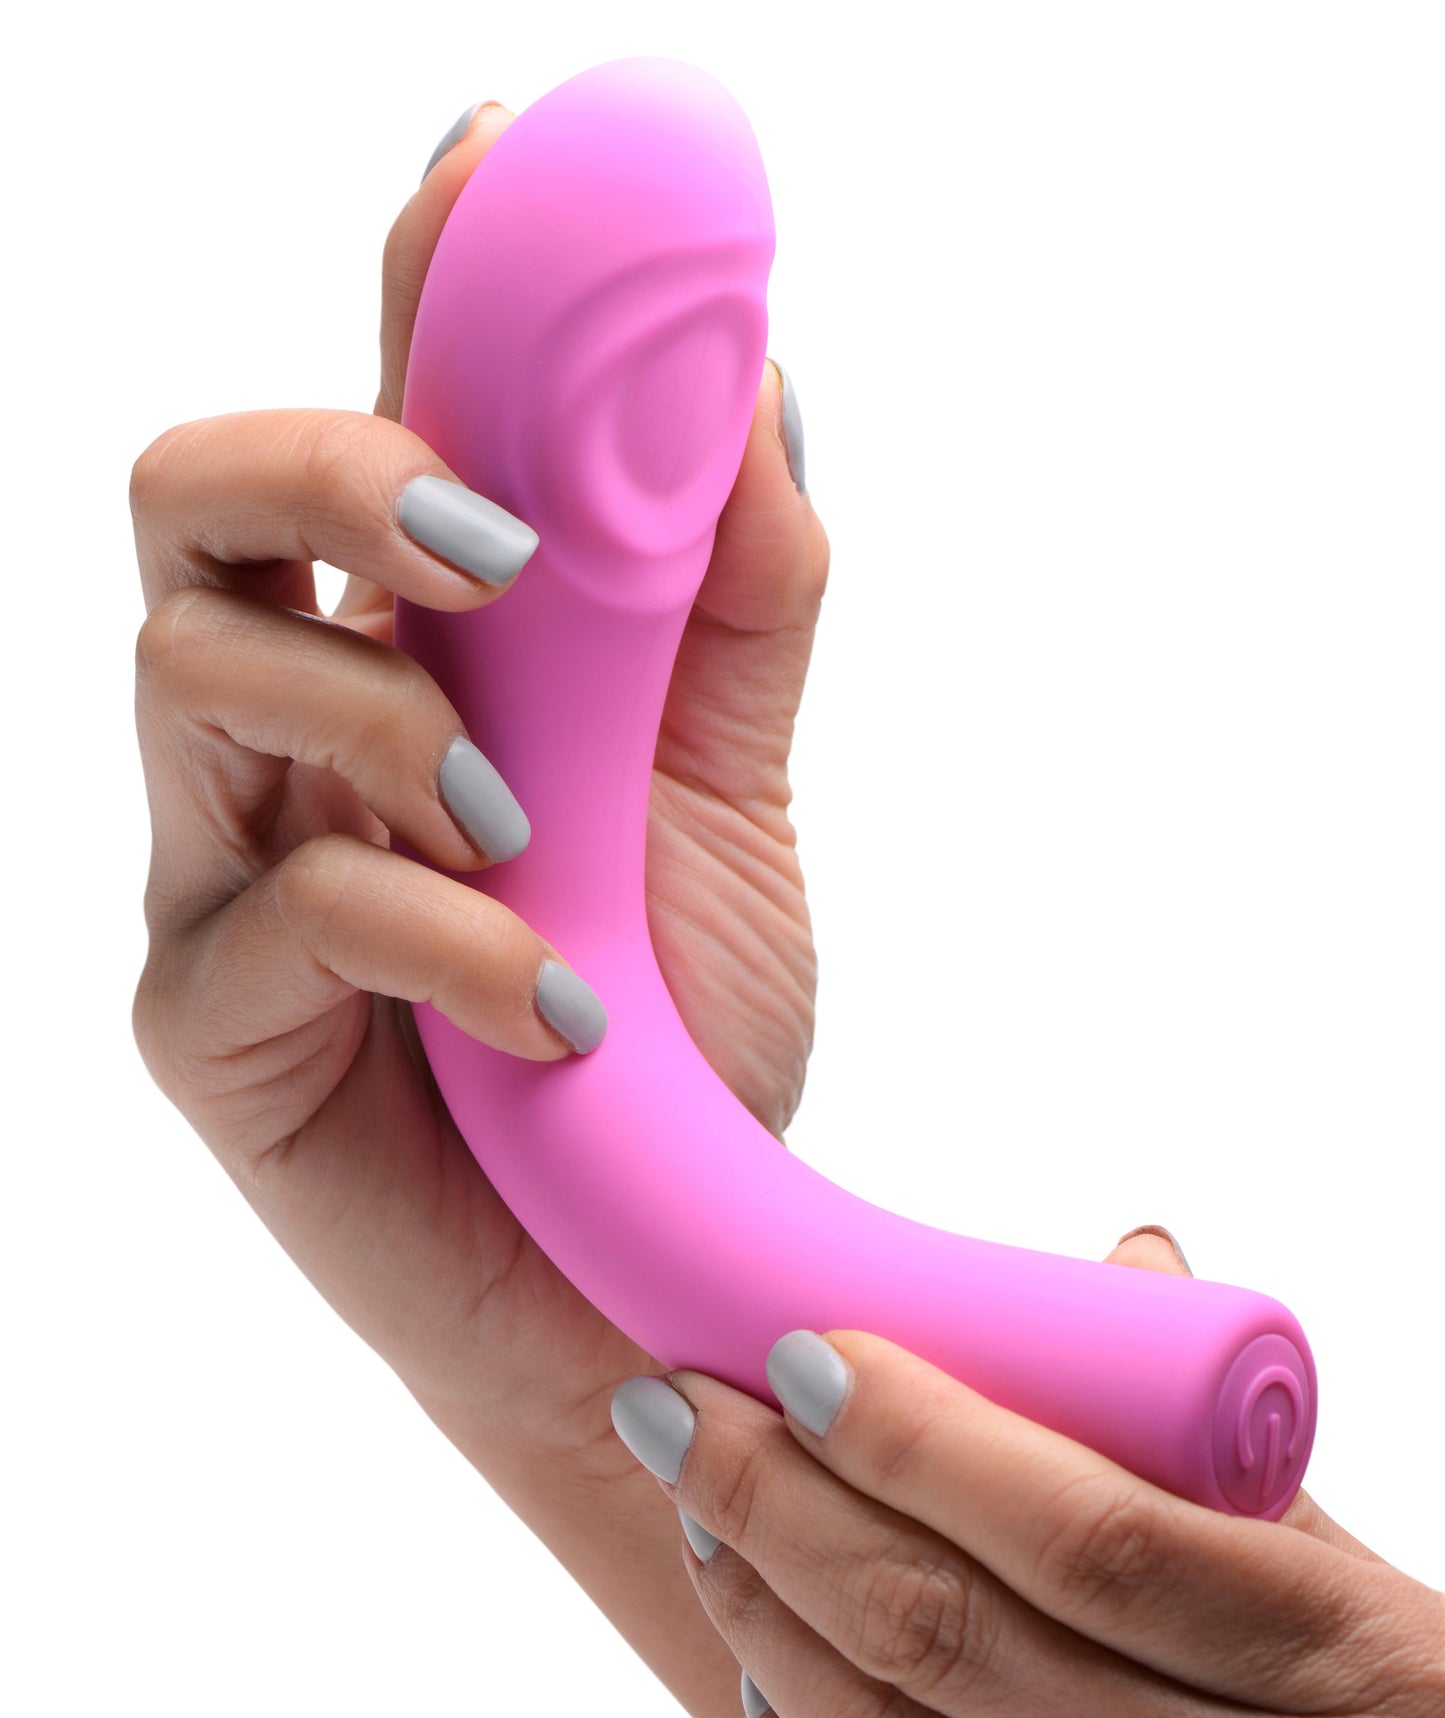 5 Star 9x Pulsing G-Spot Silicone Vibrator - Pink INM-AG600-PINK